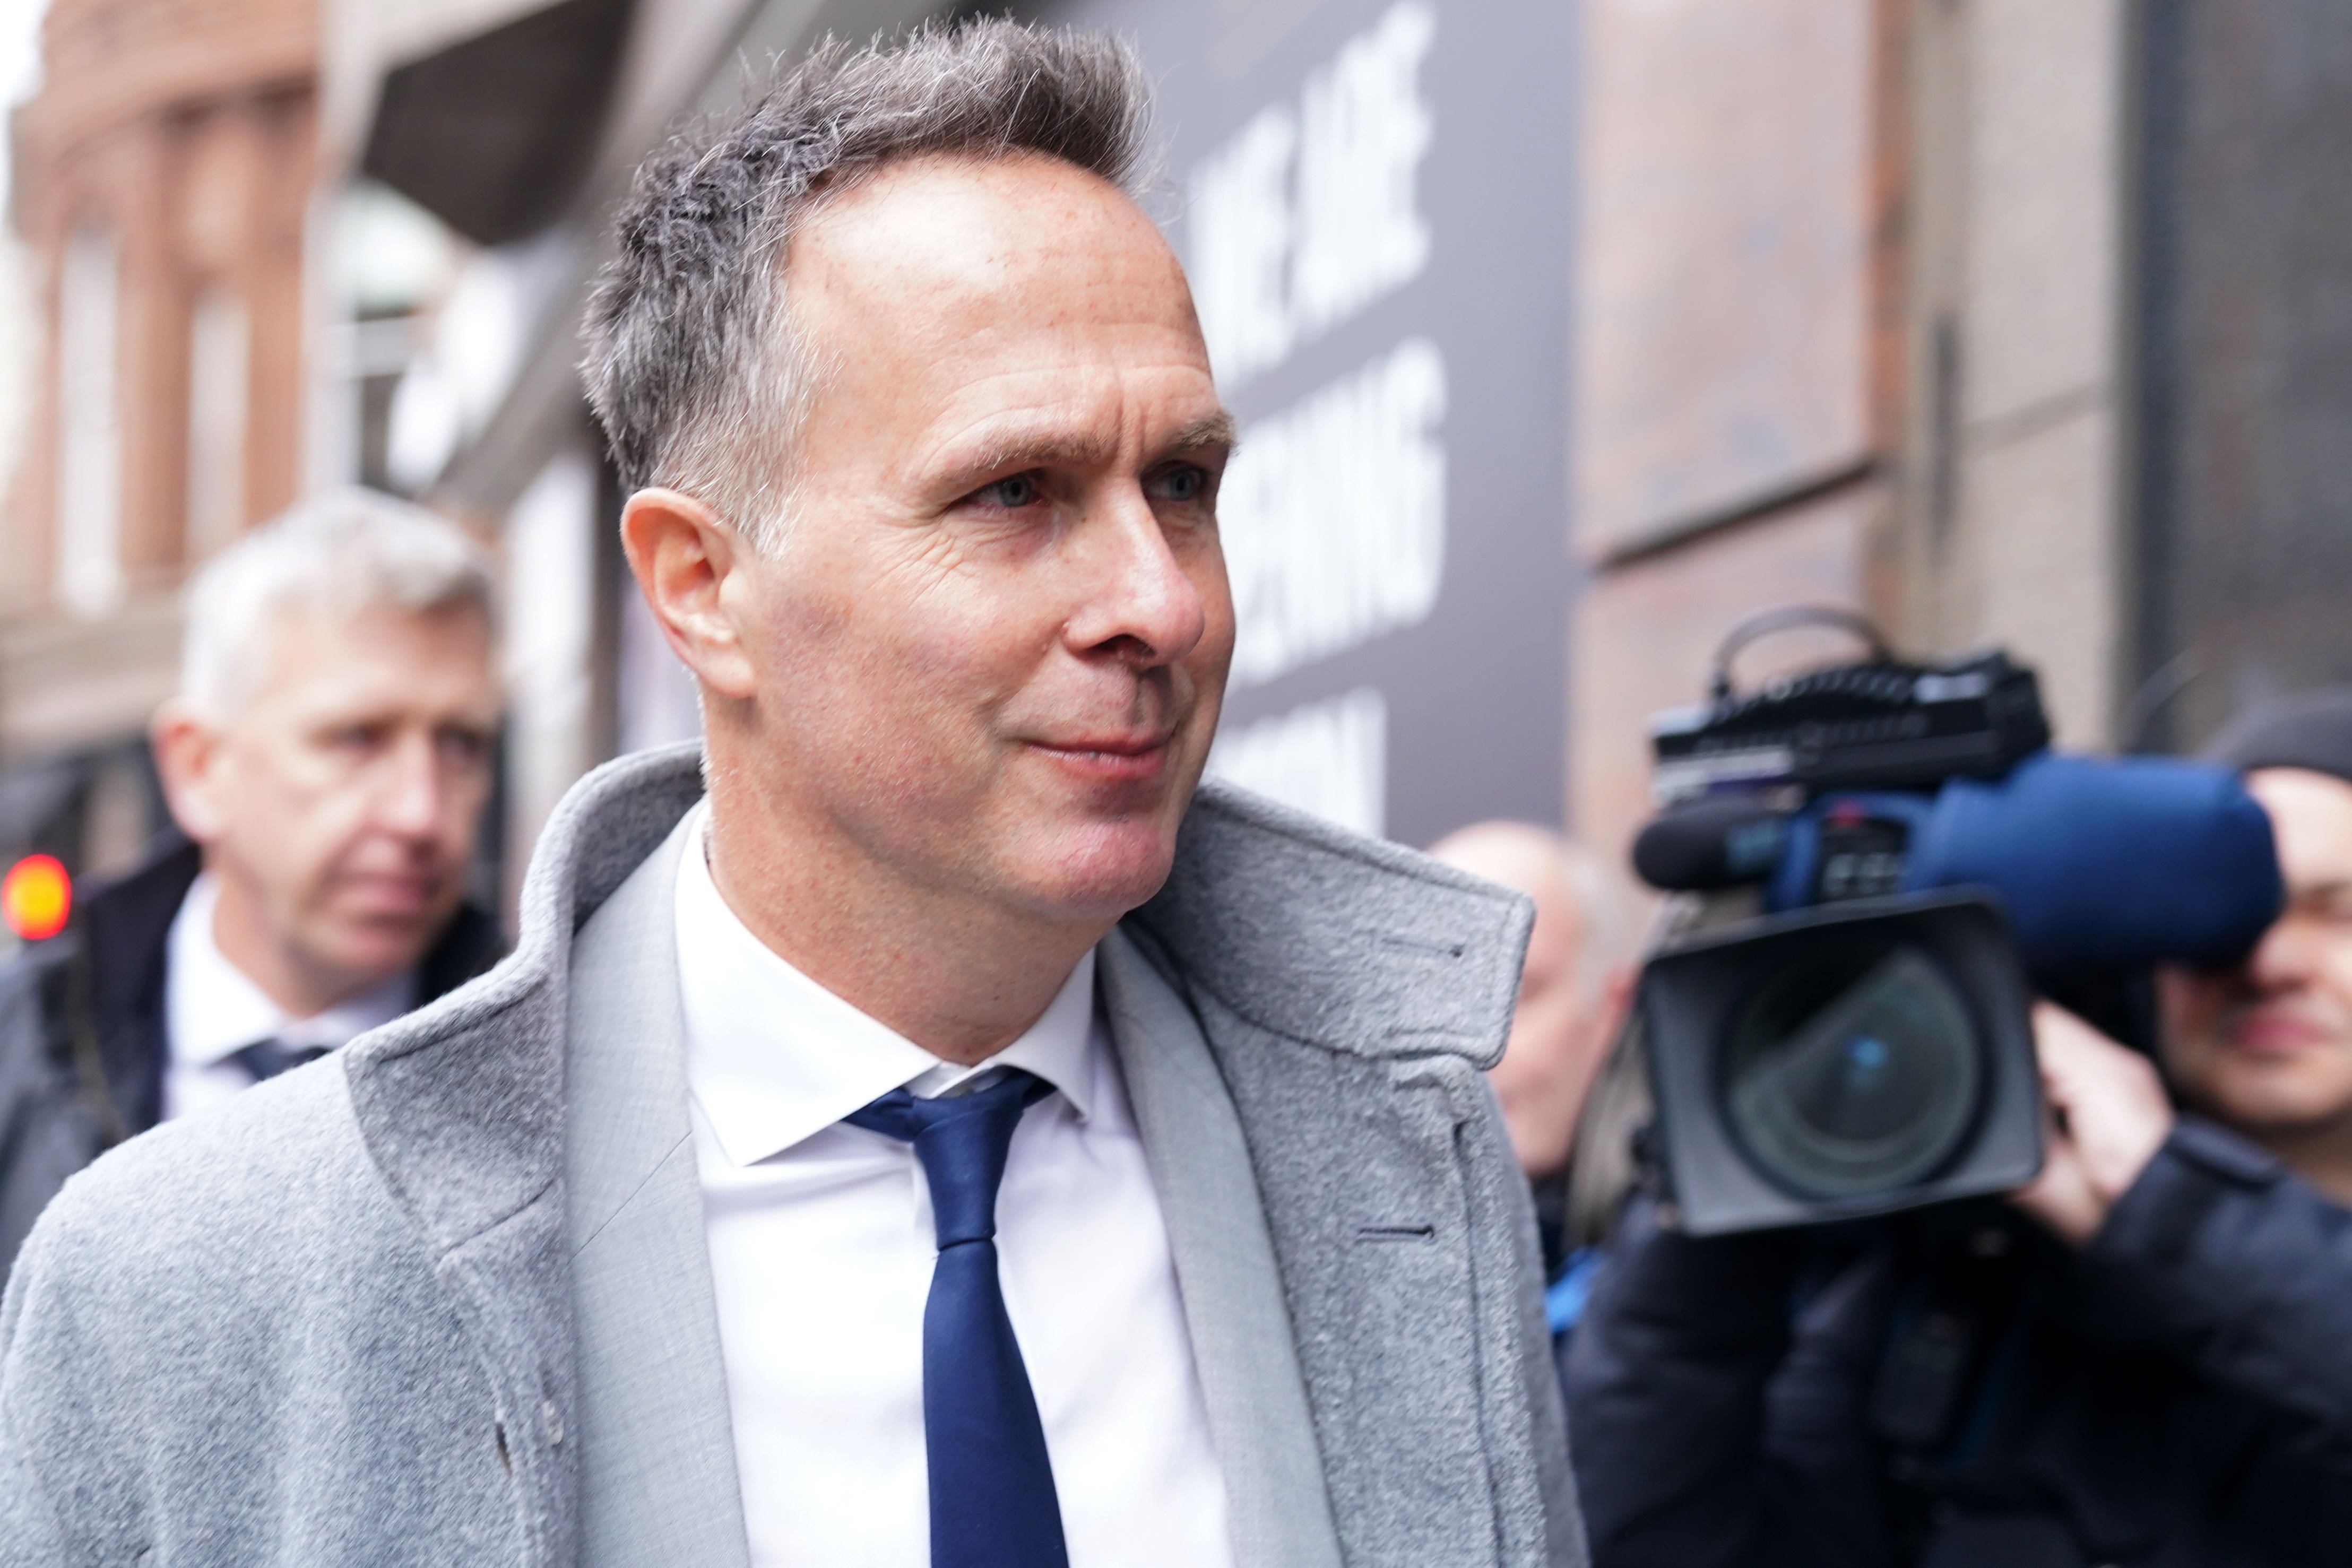 Michael Vaughan arrives for the third day of the CDC Panel Hearing at the International Arbitration Centre, London. A panel of the Cricket Discipline Commission will hear disciplinary proceedings brought by the England and Wales Cricket Board against Yorkshire County Cricket Club. Picture date: Friday March 3, 2023.